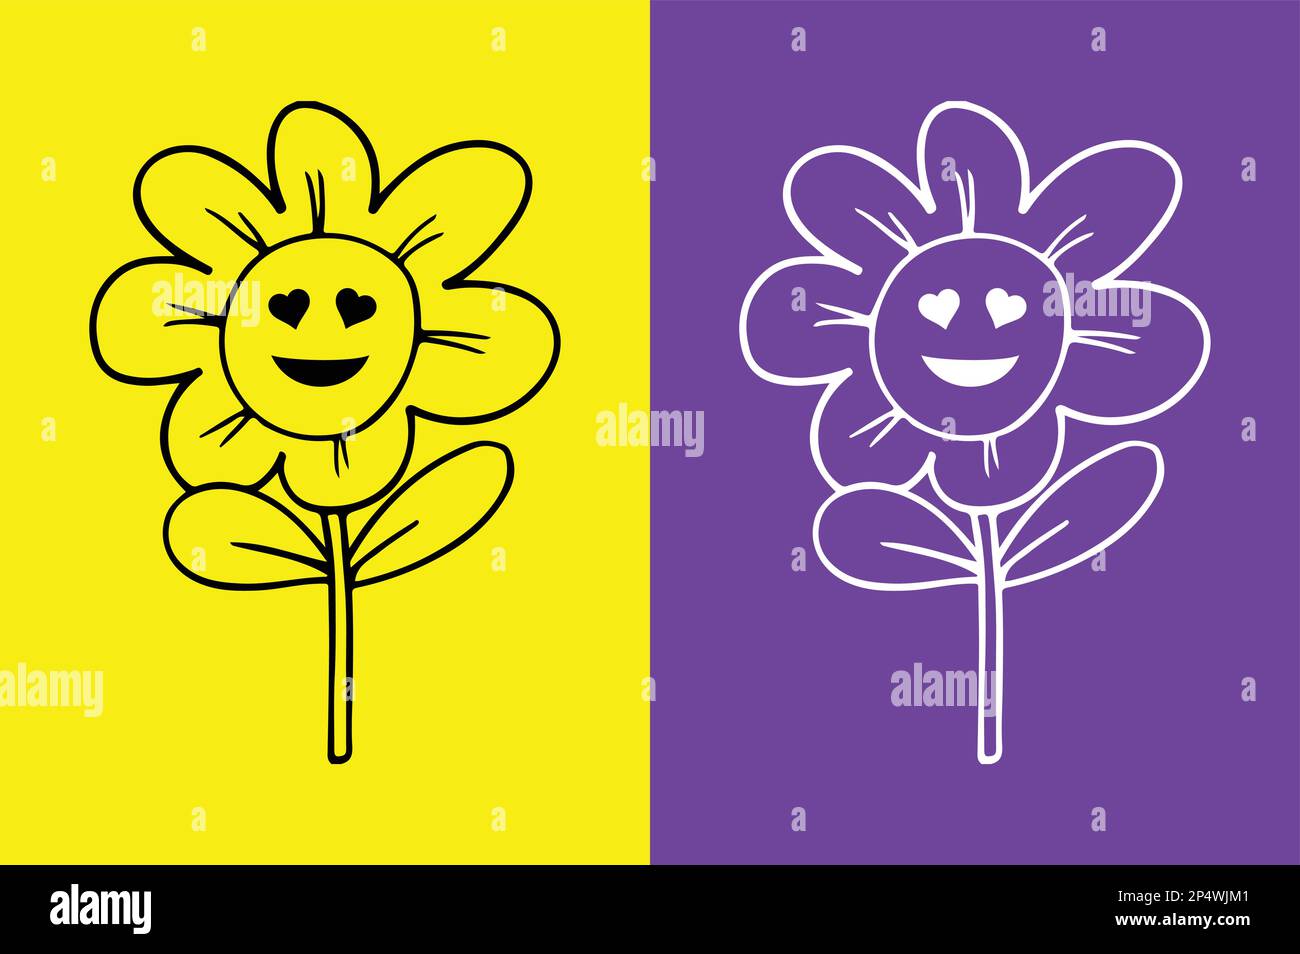 Flower smiling face with heart eyes emoji Stock Vector